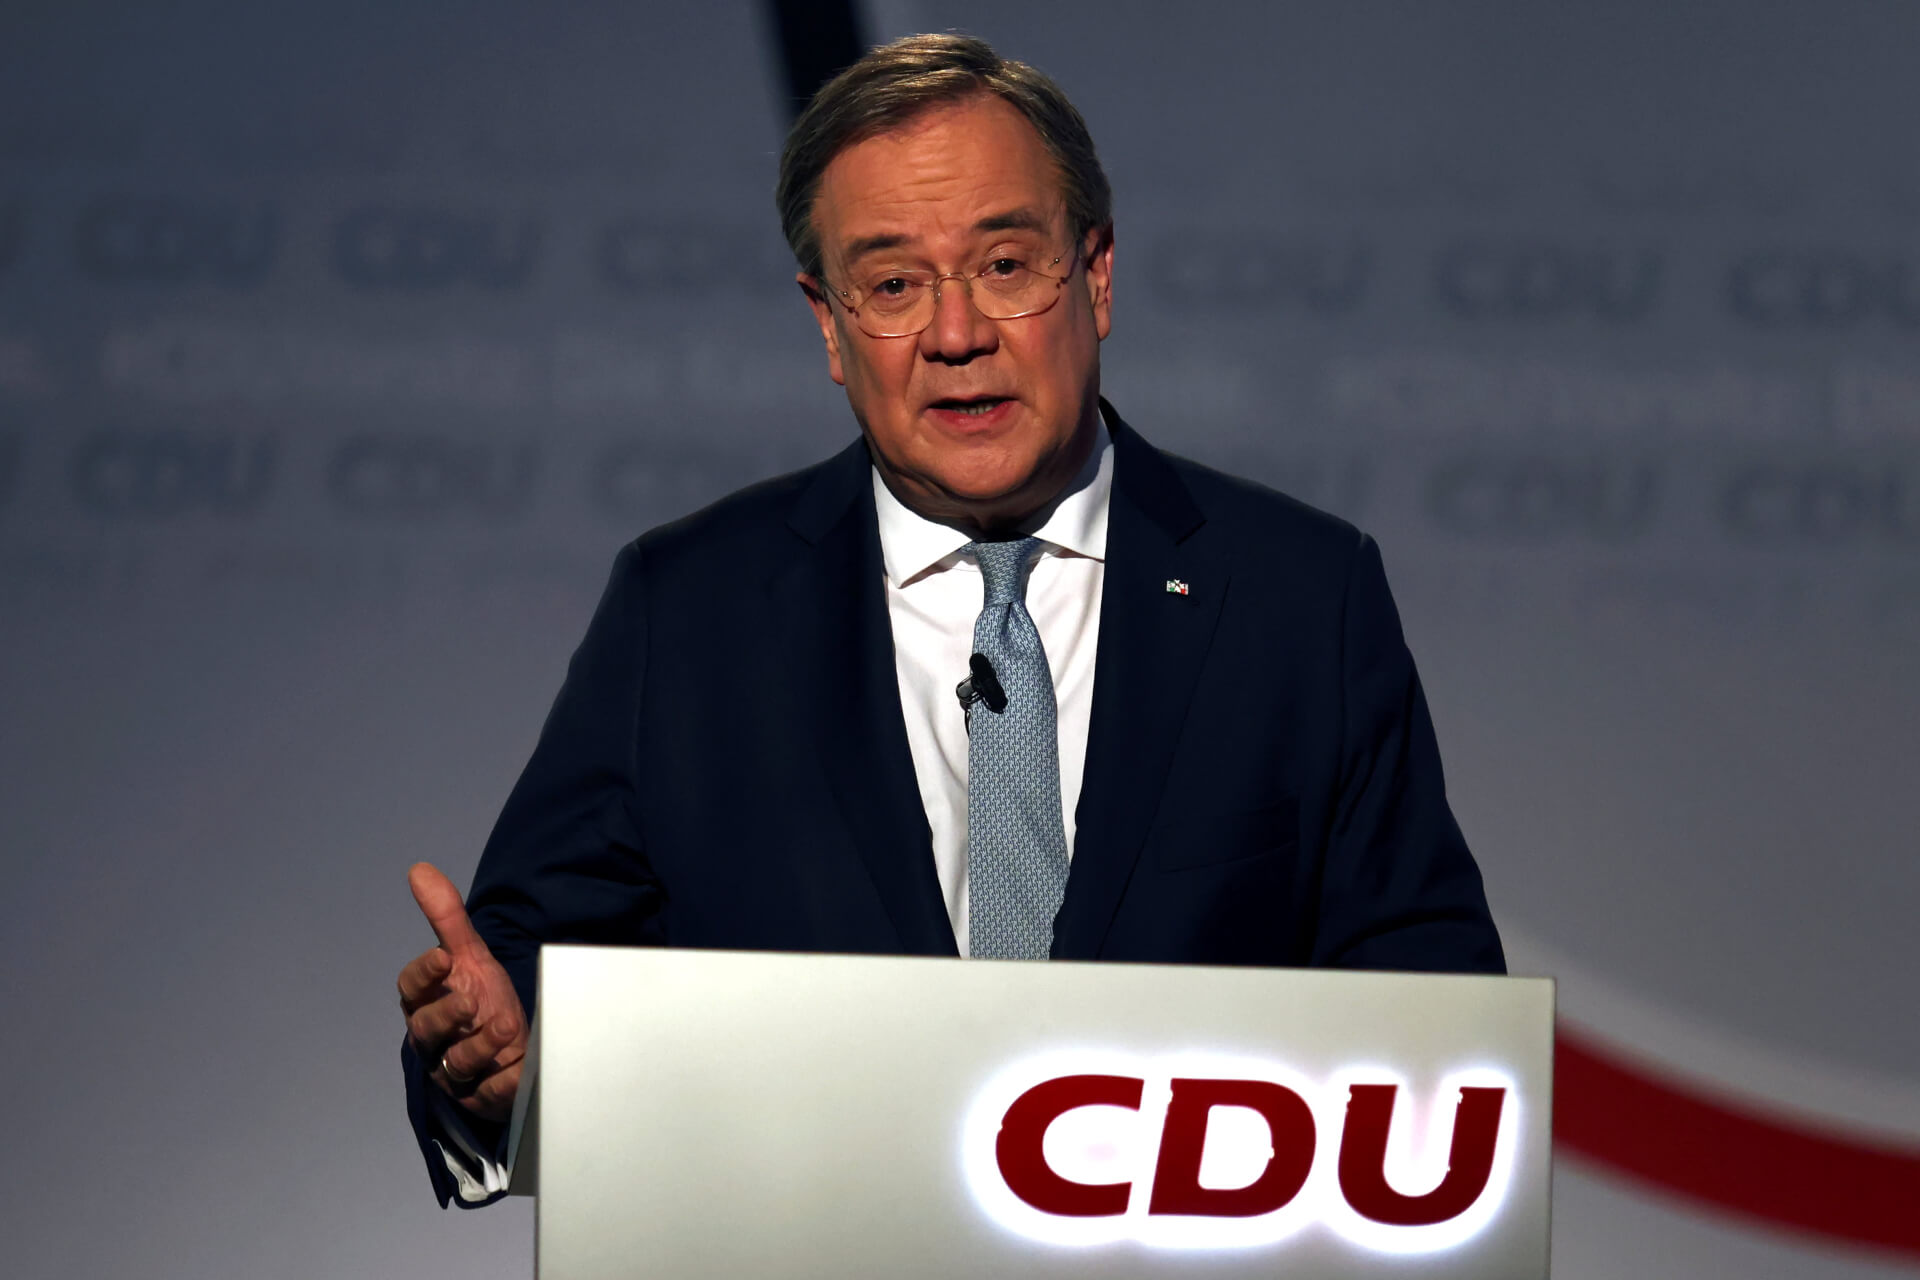 CDU Elects Laschet as New Party Leader and Candidate to Replace Merkel in 2021 Election